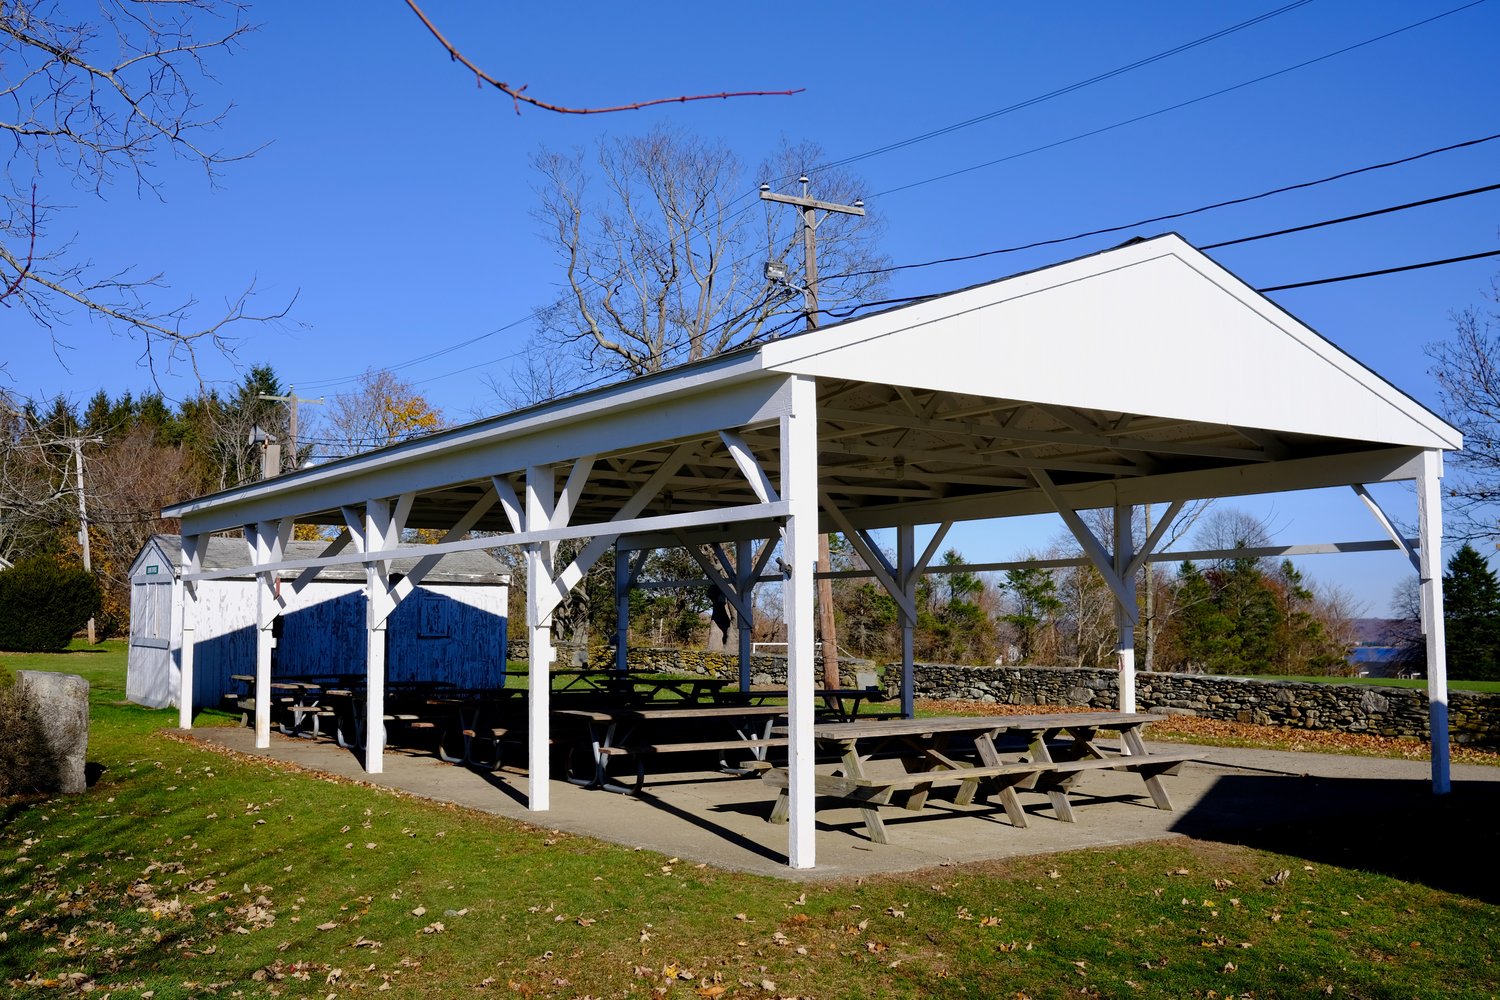 The town has applied for a state matching grand to build another pavilion next to the existing one (pictured) at Glen Park.